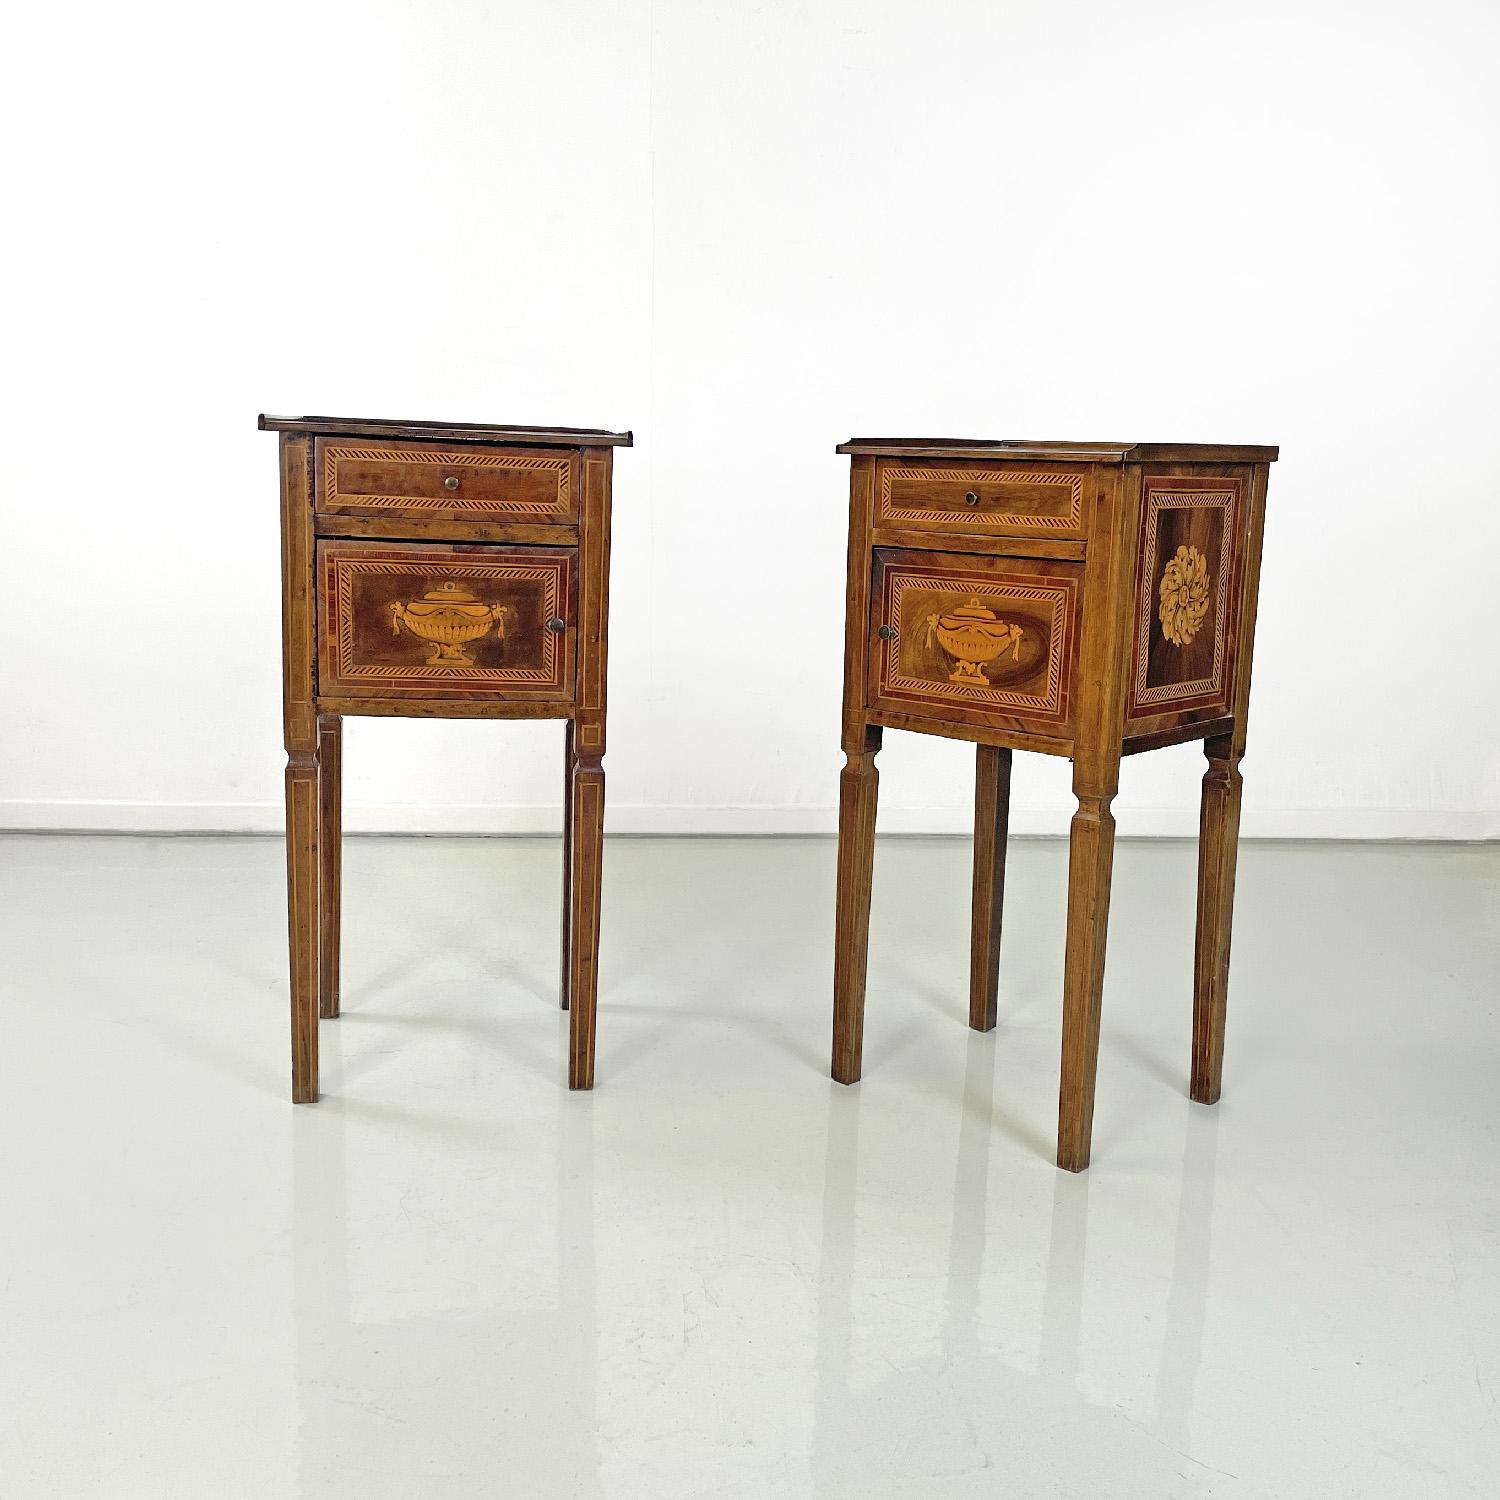 Italian antique wooden bedside tables with inlaid floral decorations, 1750s
Pair of wooden bedside tables with inlays. The top is rectangular and has a slightly raised edge on three sides, in the center there is an inlaid floral decoration